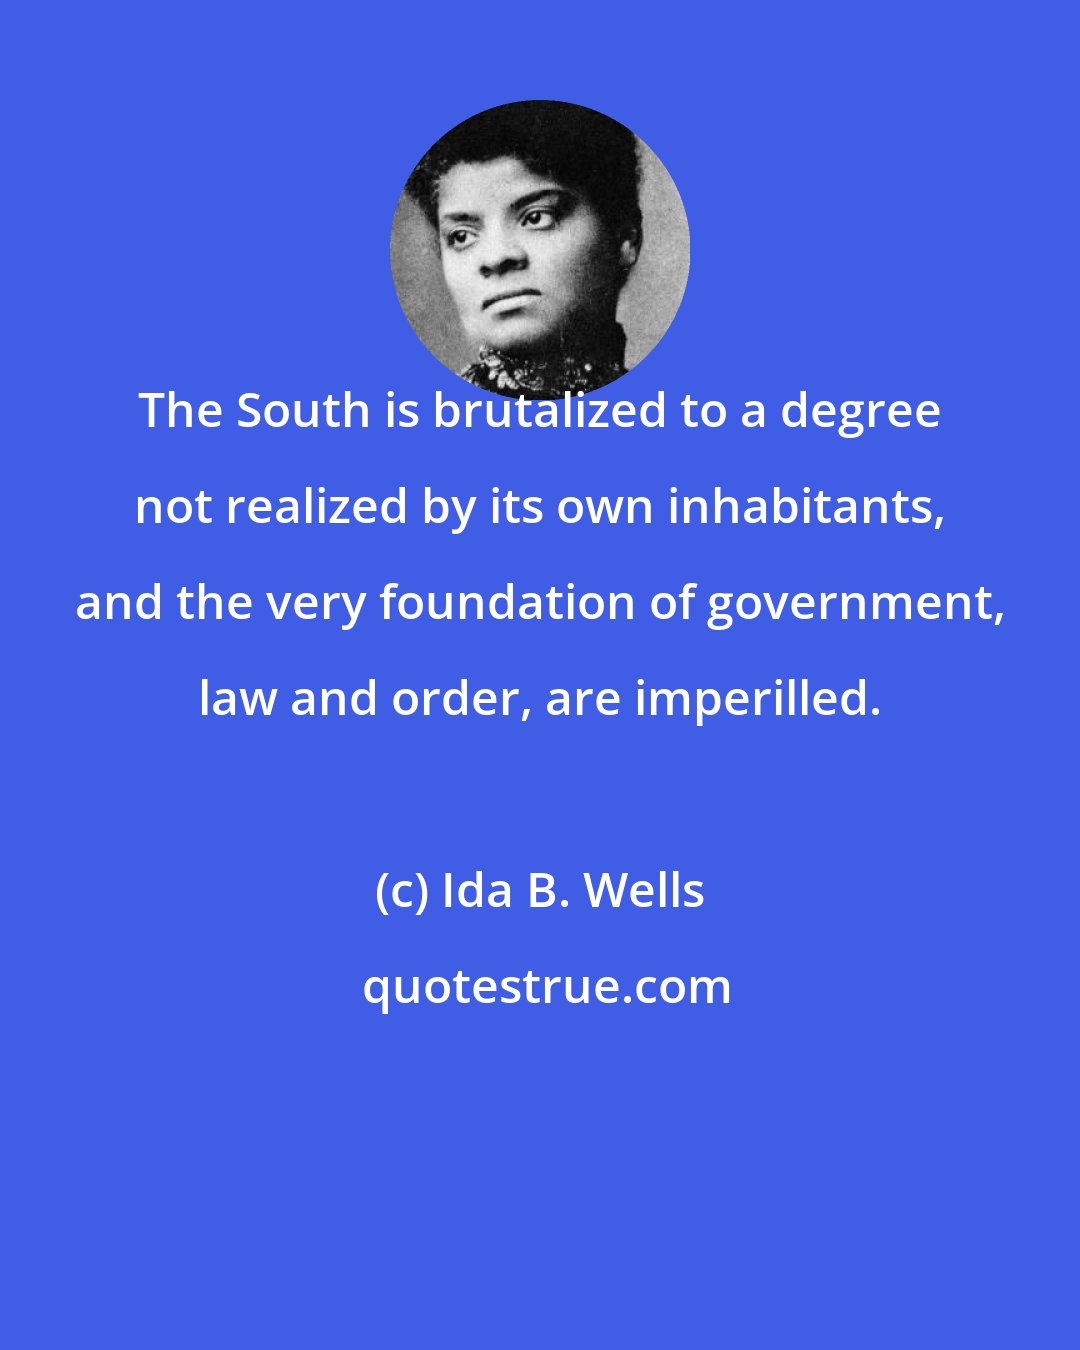 Ida B. Wells: The South is brutalized to a degree not realized by its own inhabitants, and the very foundation of government, law and order, are imperilled.